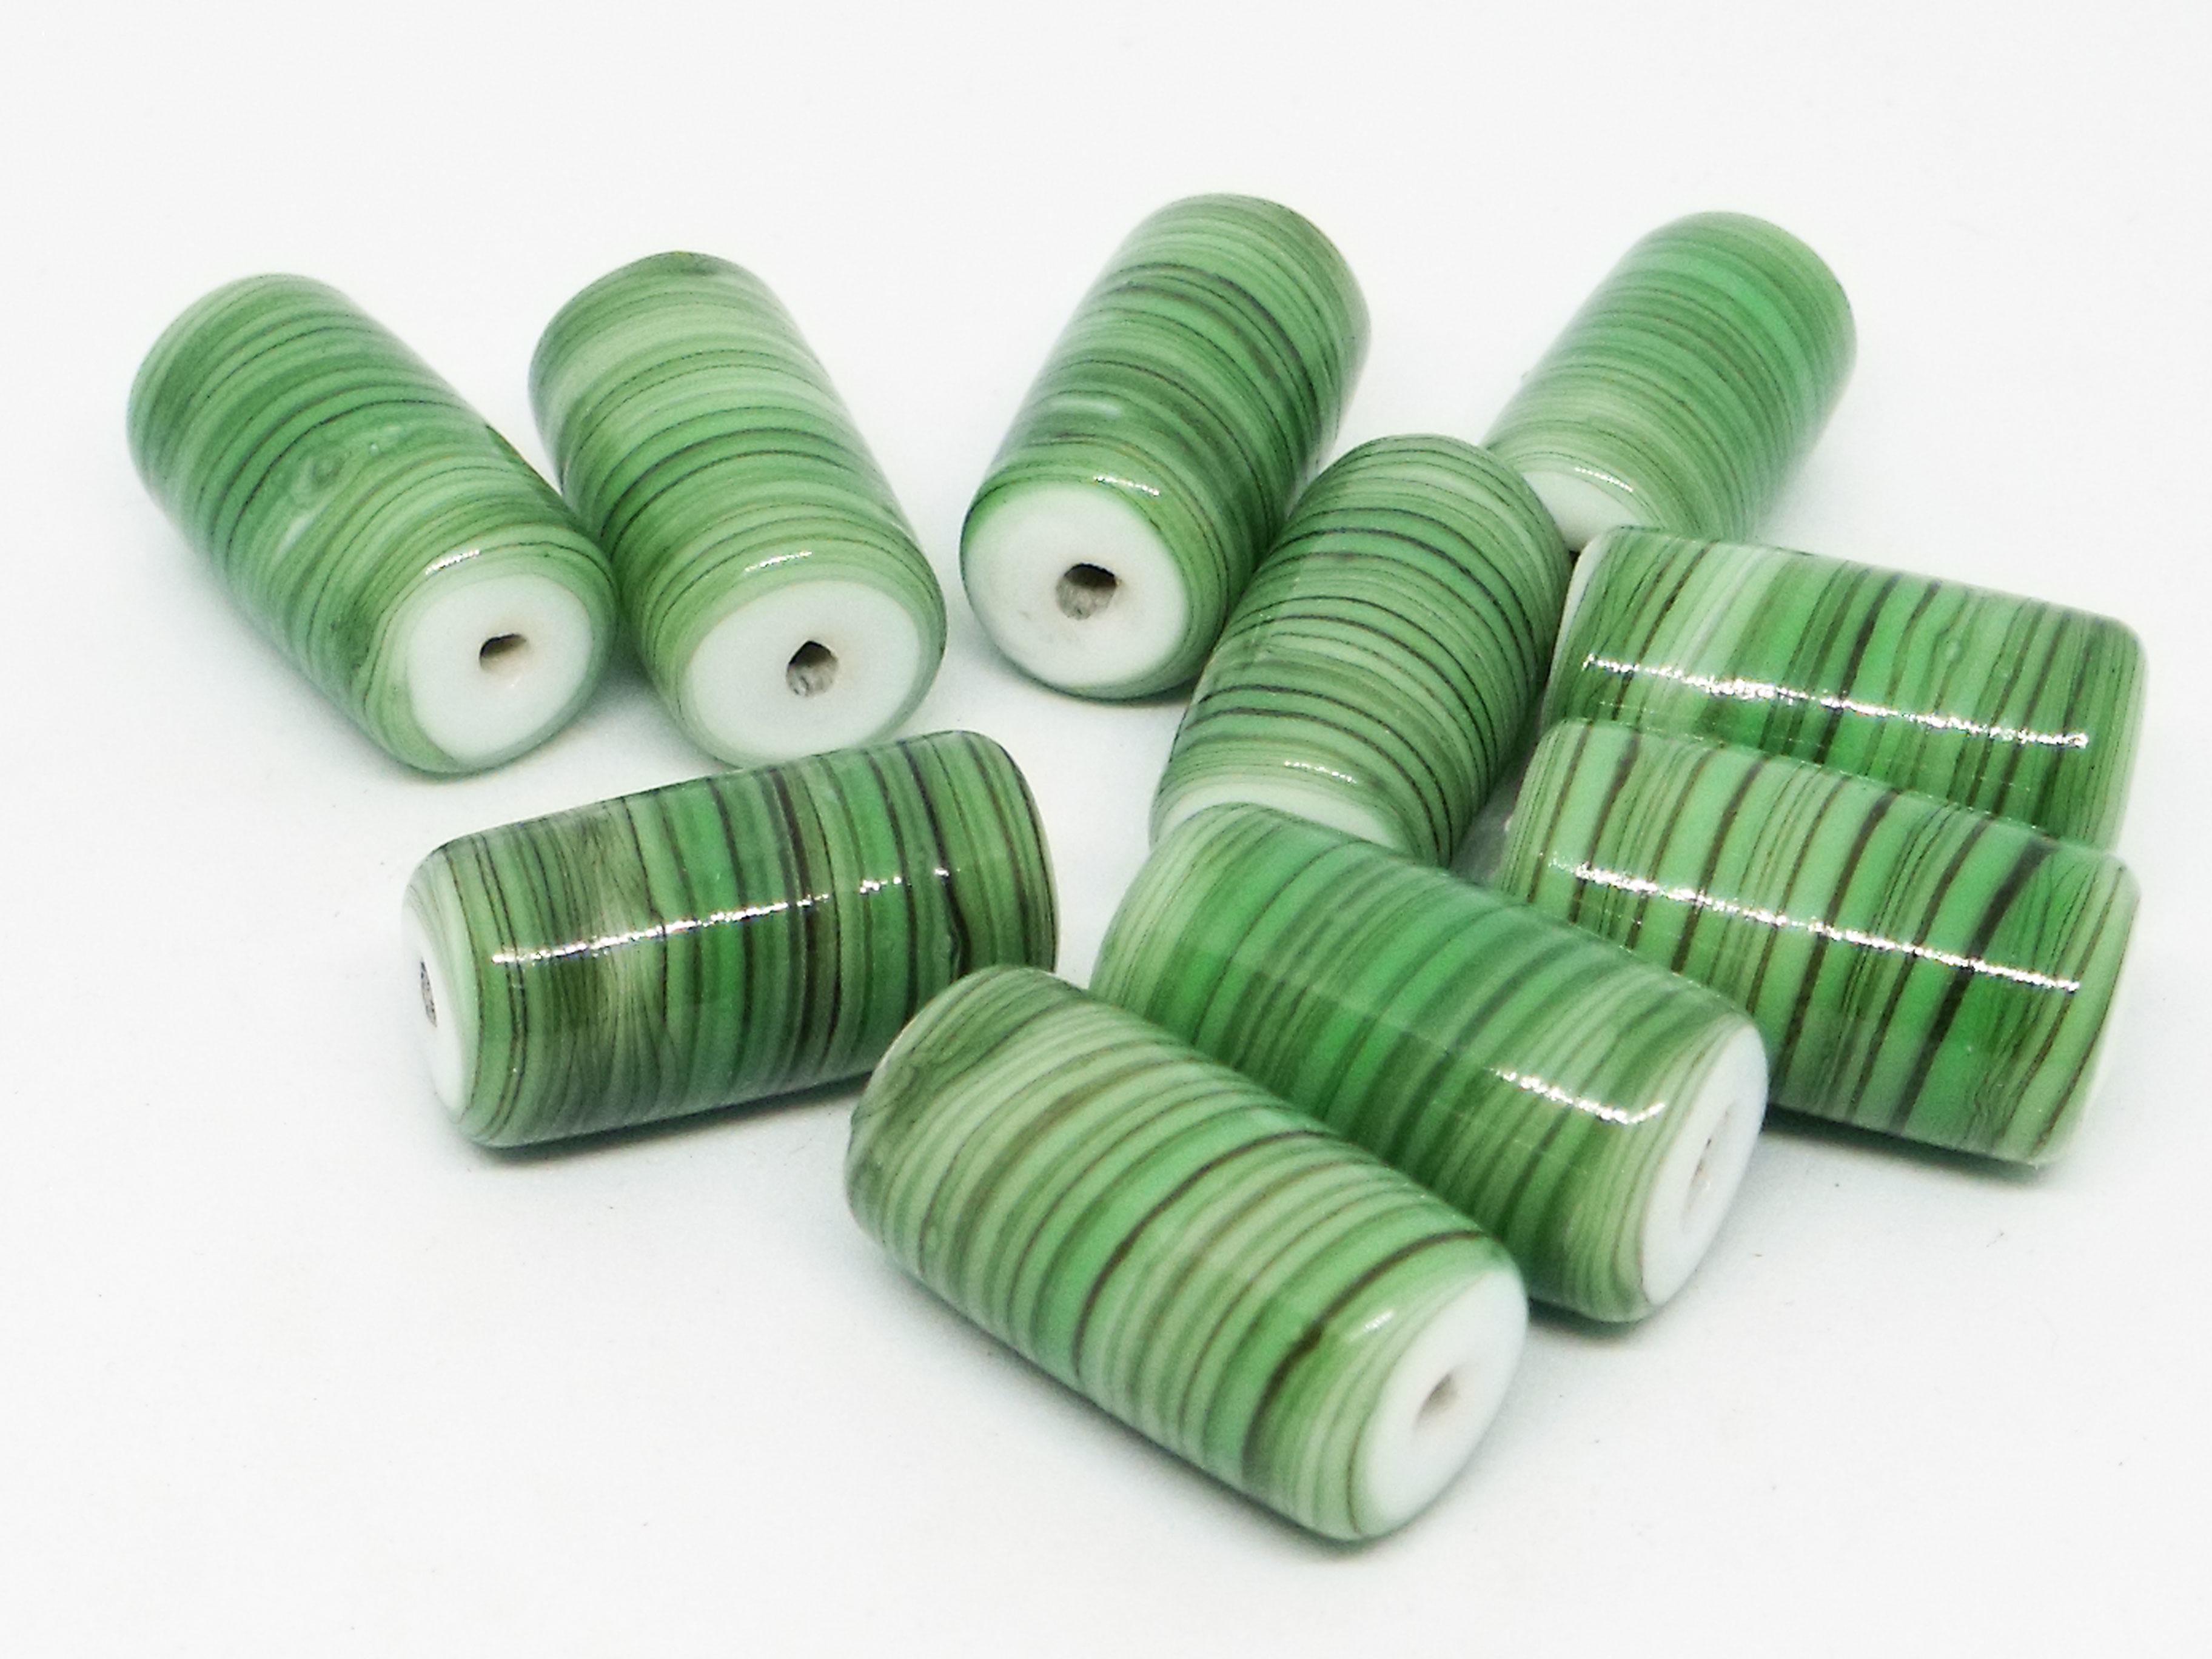 20x10mm Glass Tube Bead - White Base with Green and Black Stripes